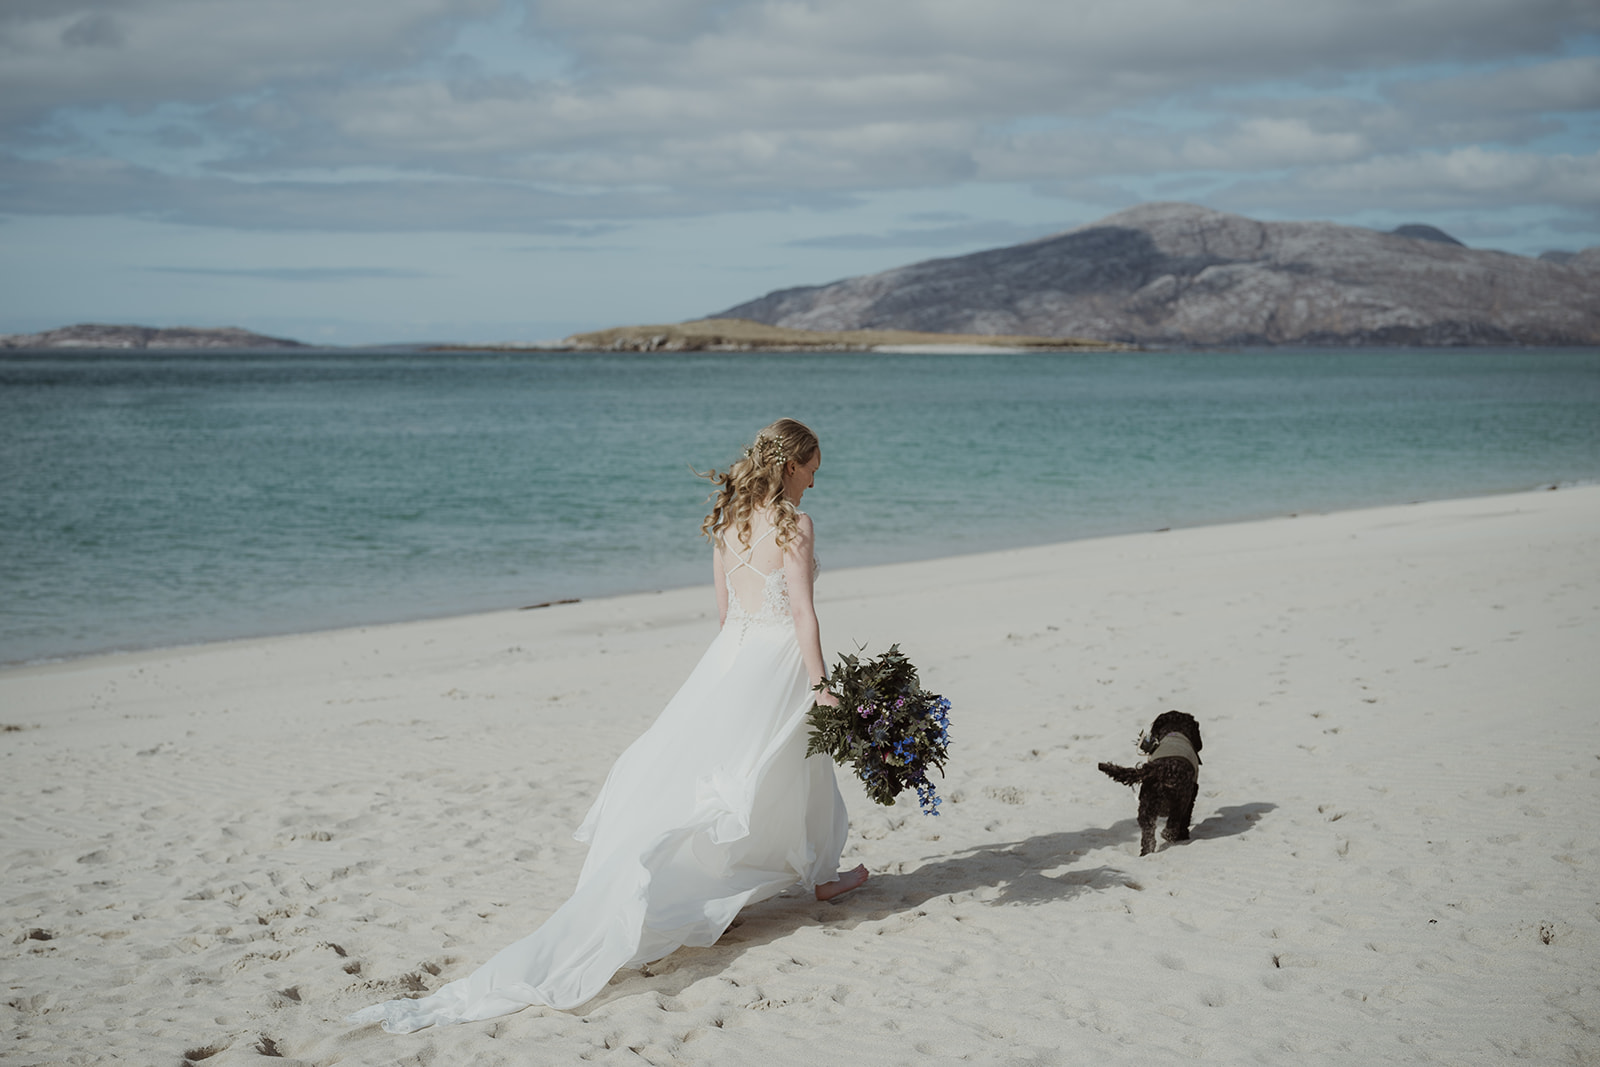 getting married on a beach in scotland